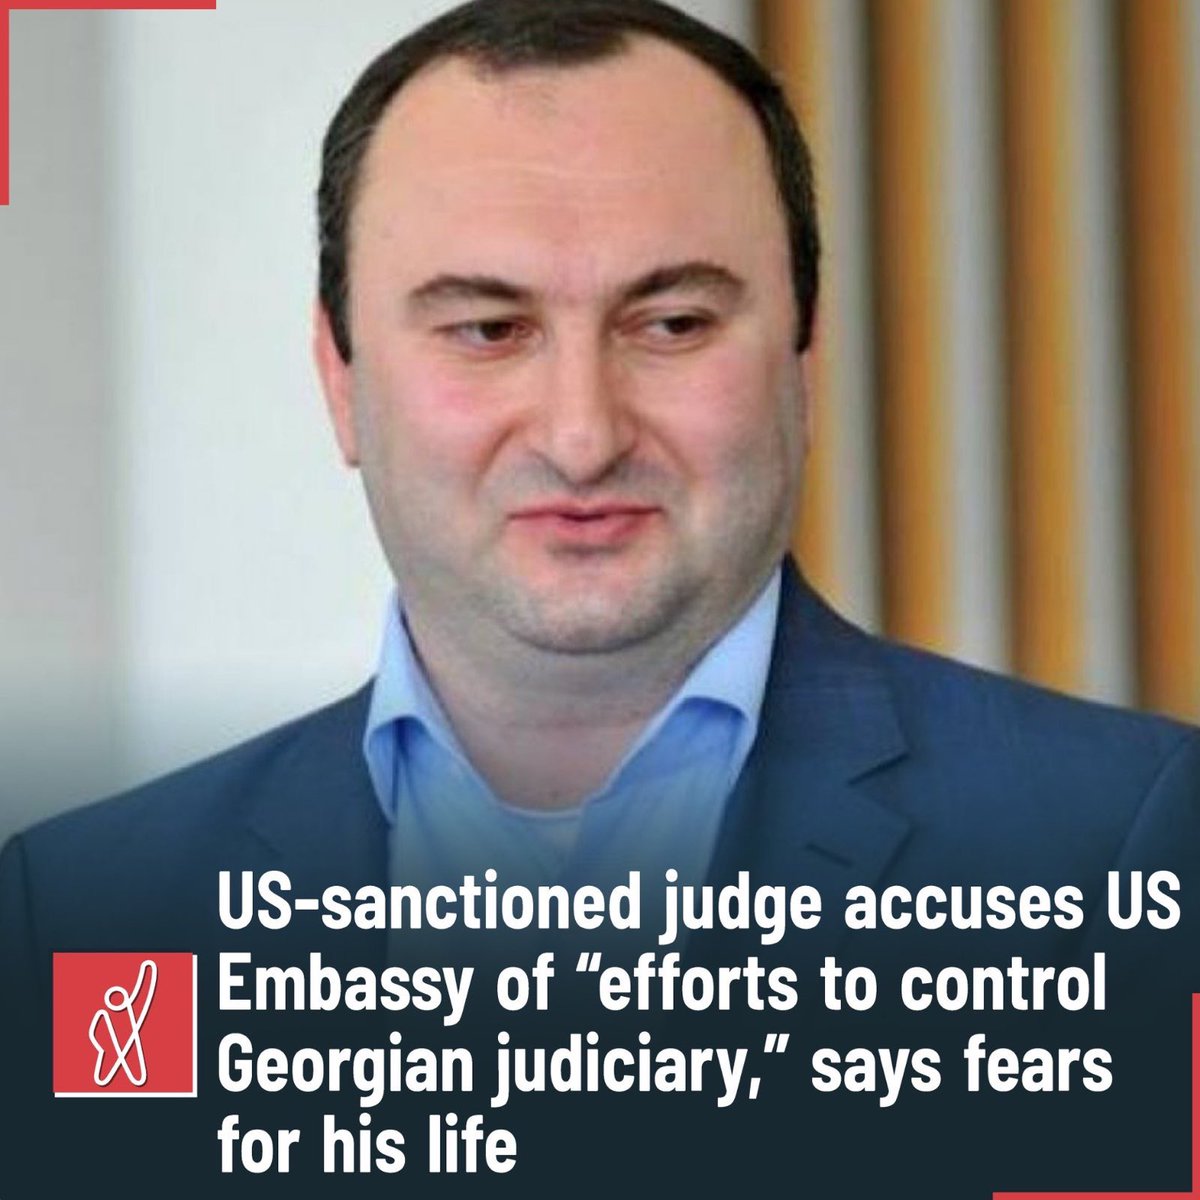 OR- and bear with me here judges from the Nation of Georgia- stop being corrupt… maybe try that? The people of Georgia deserve better than this propoganda from the mouth of Russians